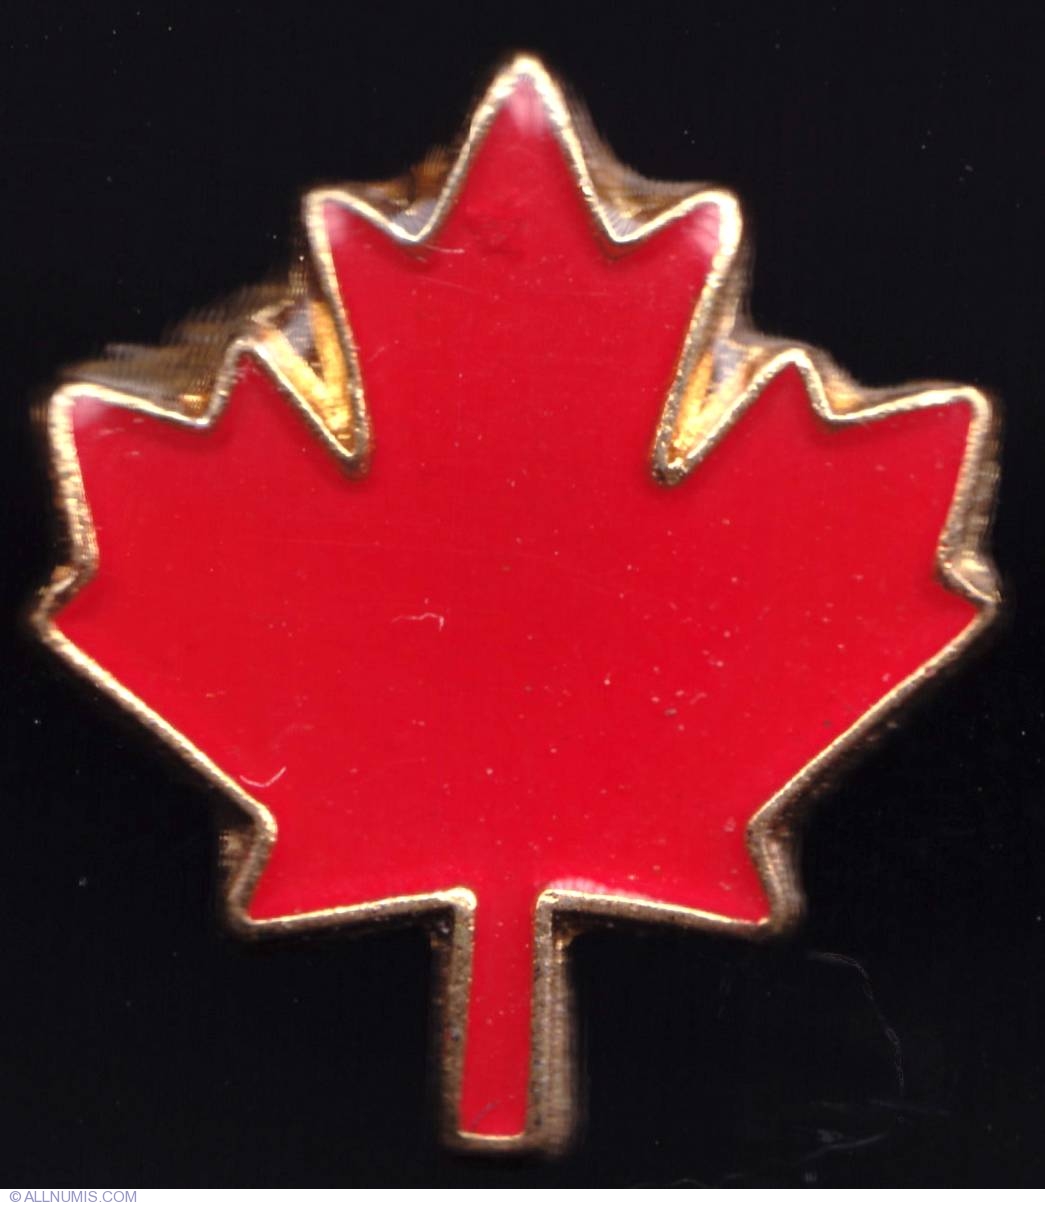 canadian-maple-leaf-type-4-canadian-identity-canada-pin-4242